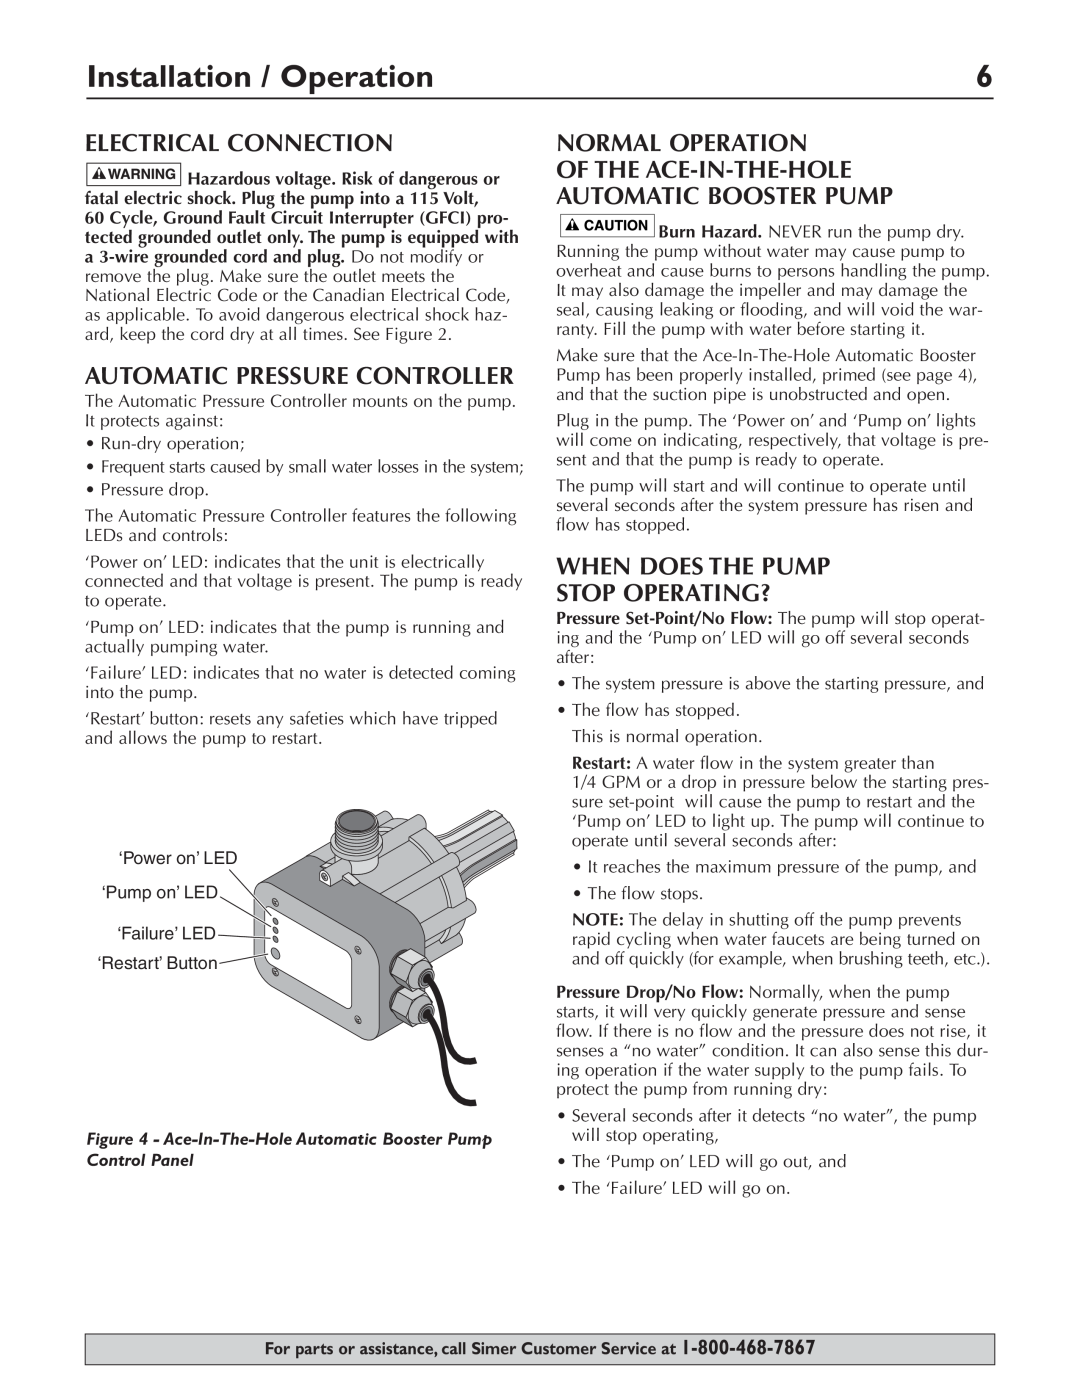 Simer Pumps 3075SS-01 owner manual Installation / Operation, Electrical Connection, When Does The Pump Stop Operating? 